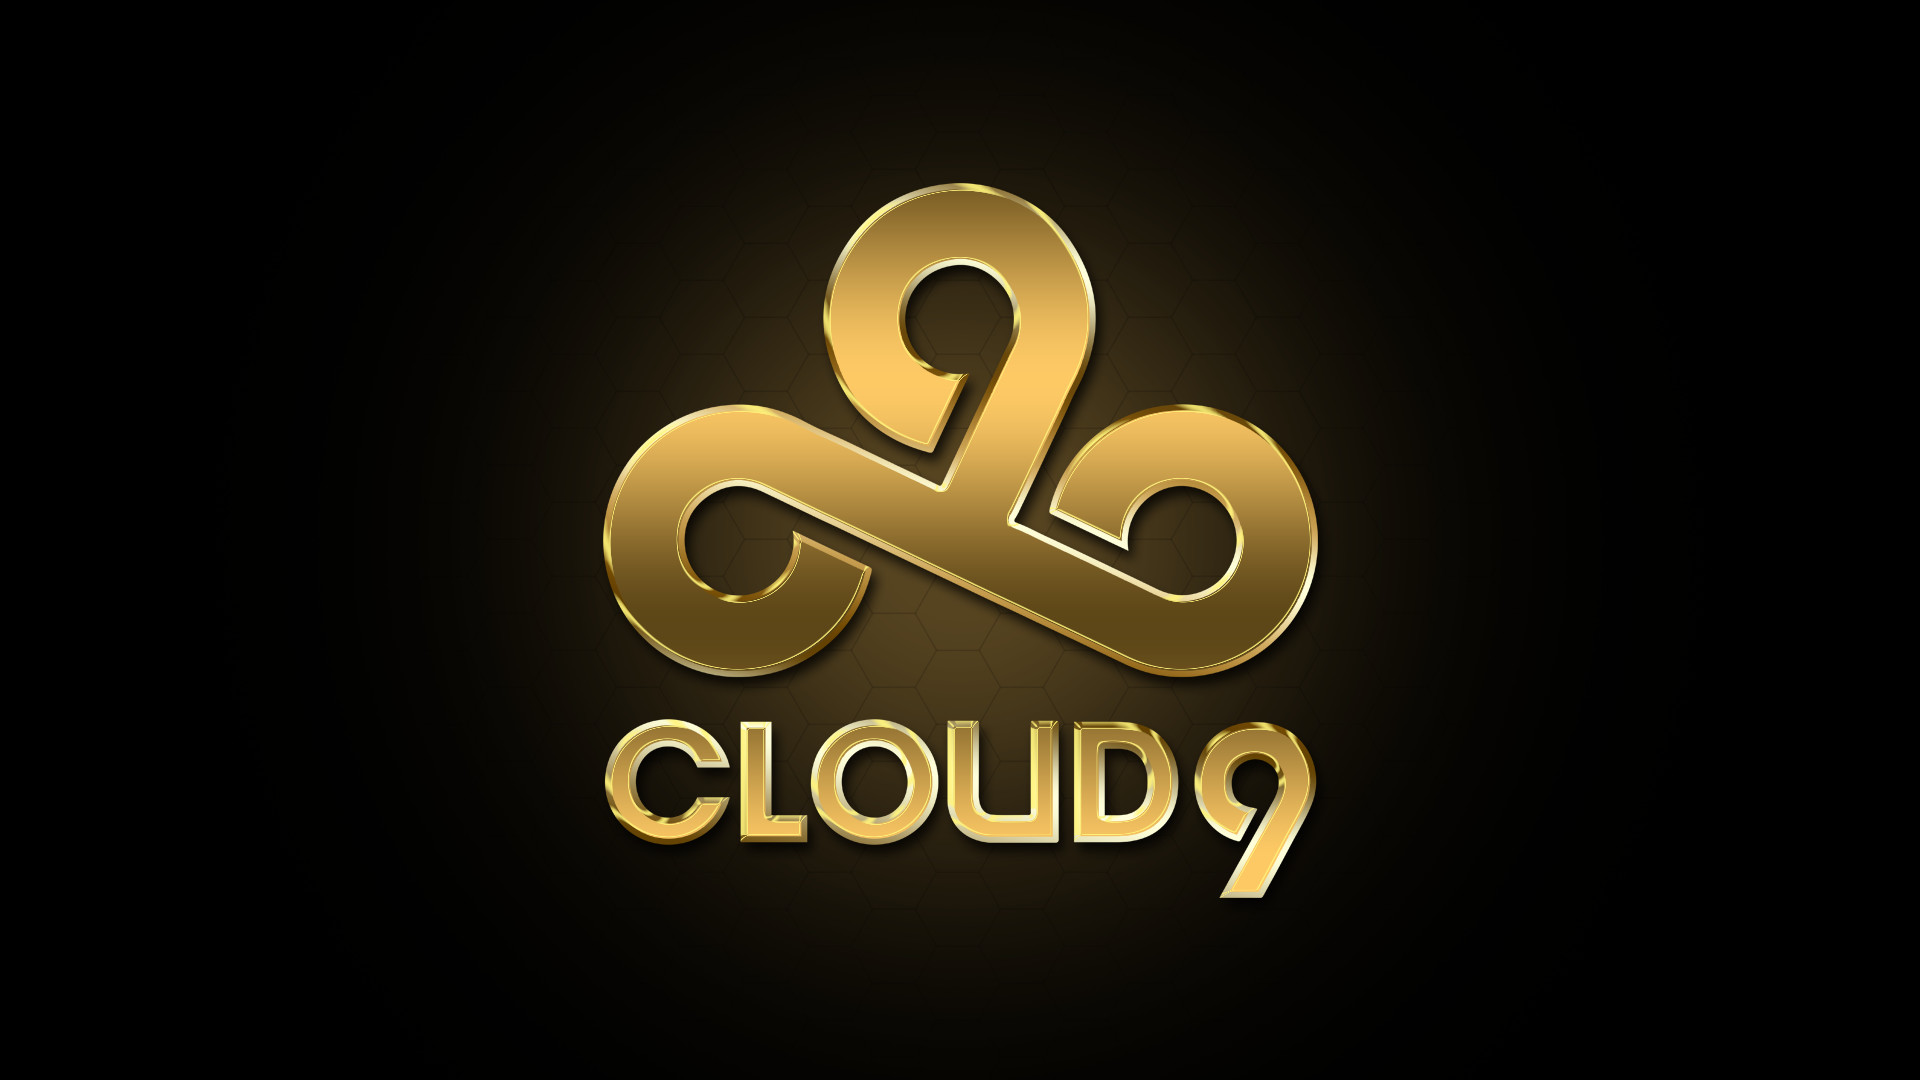 Cloud 9 Csgo HD Wallpapers (94+ images)
